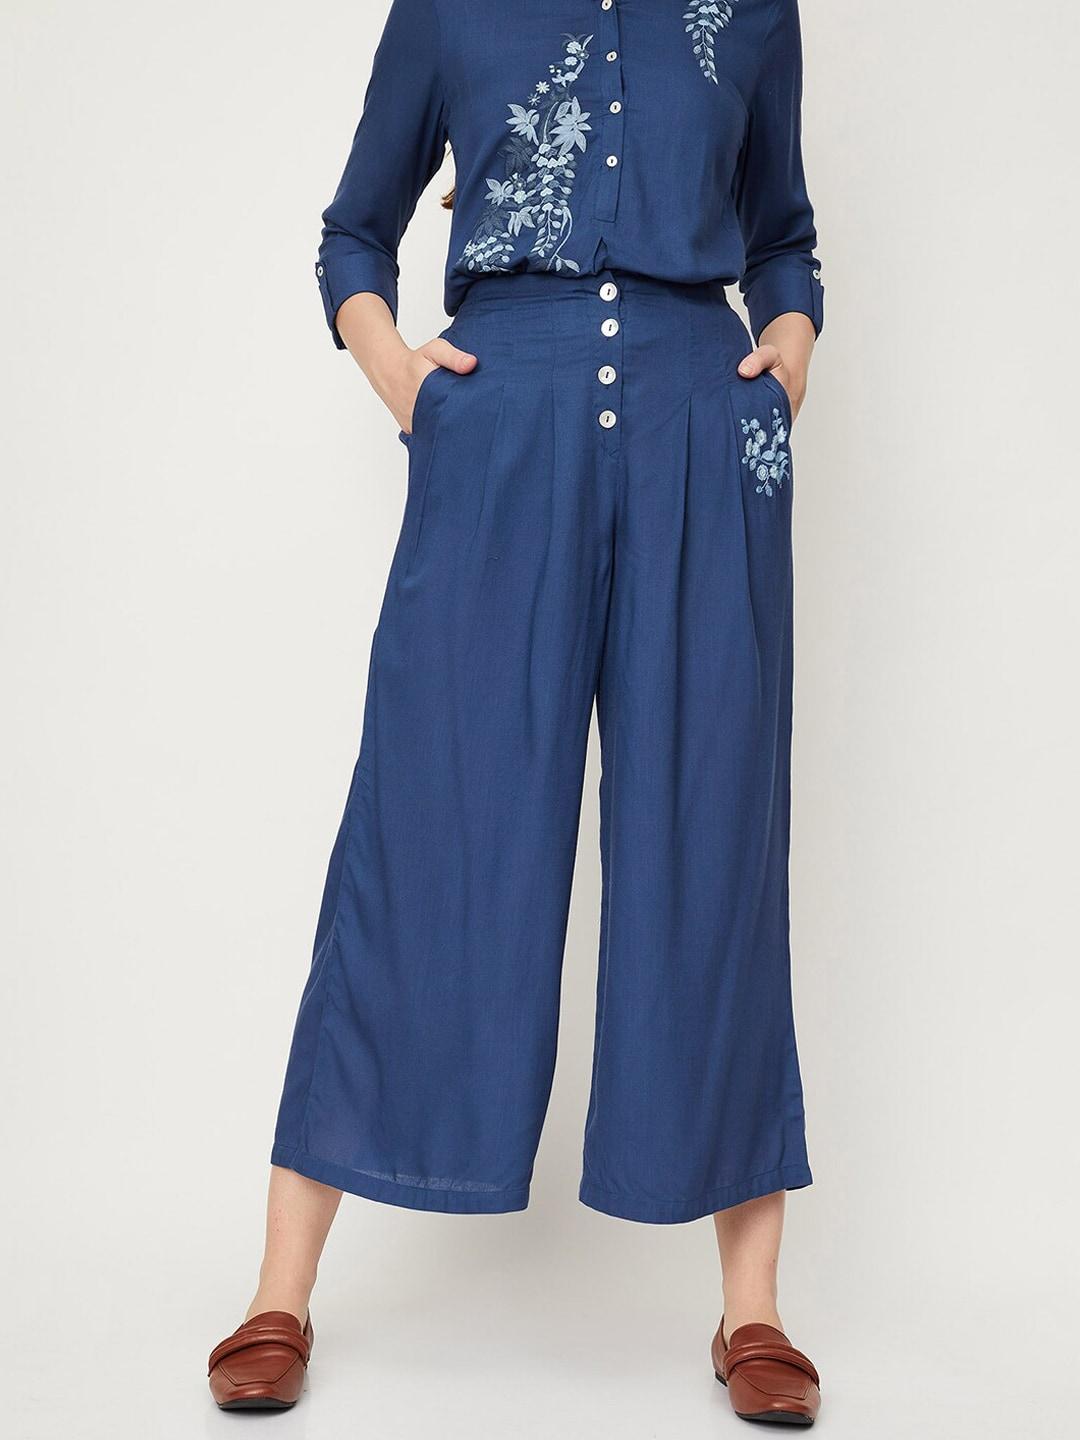 max women floral embroidered pleated parallel trousers